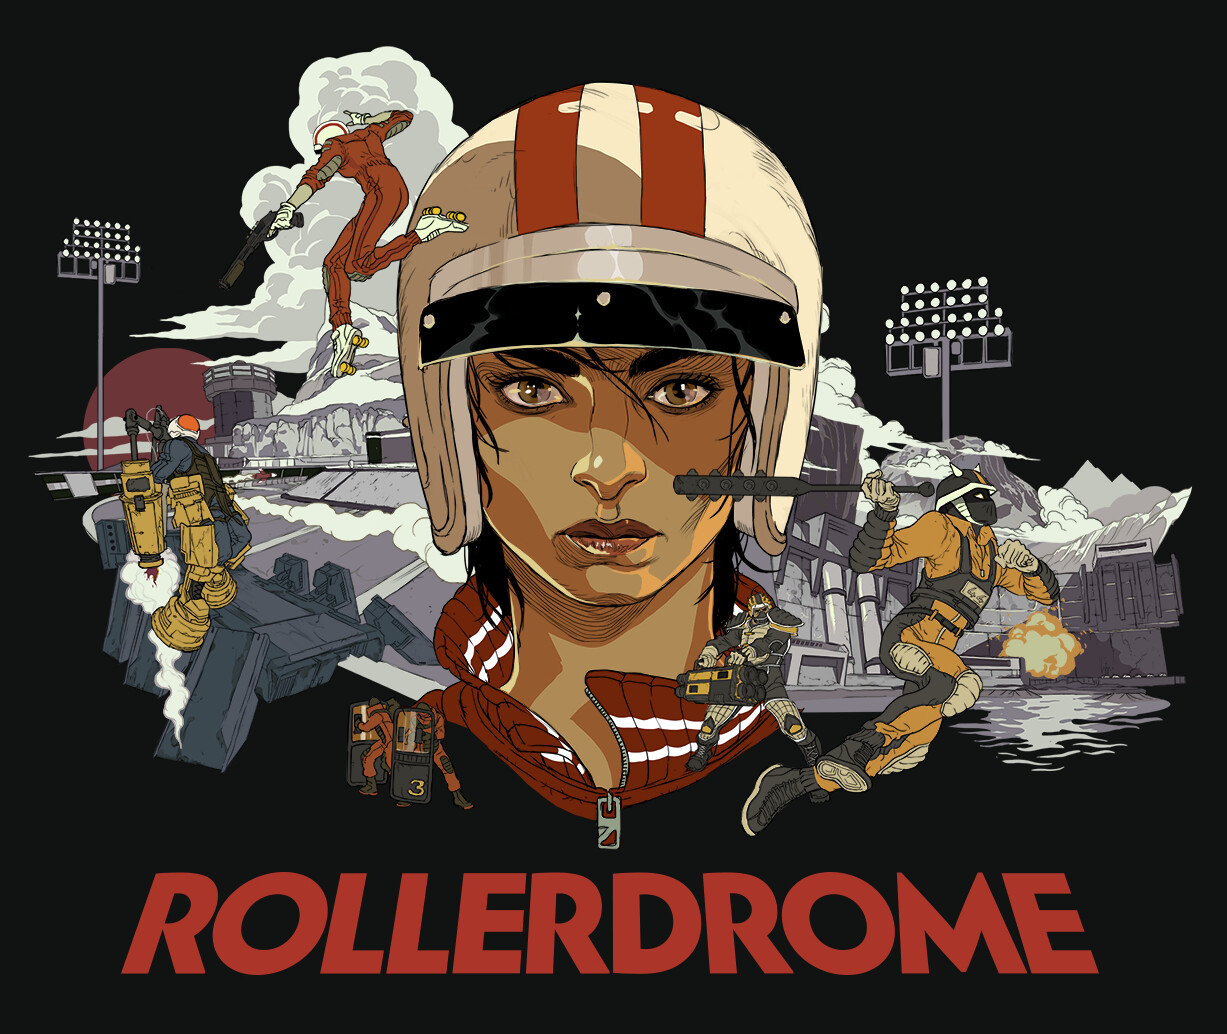 Rollerdrome hits Xbox Series X|S and Windows PC, offering thrilling gaming experience.